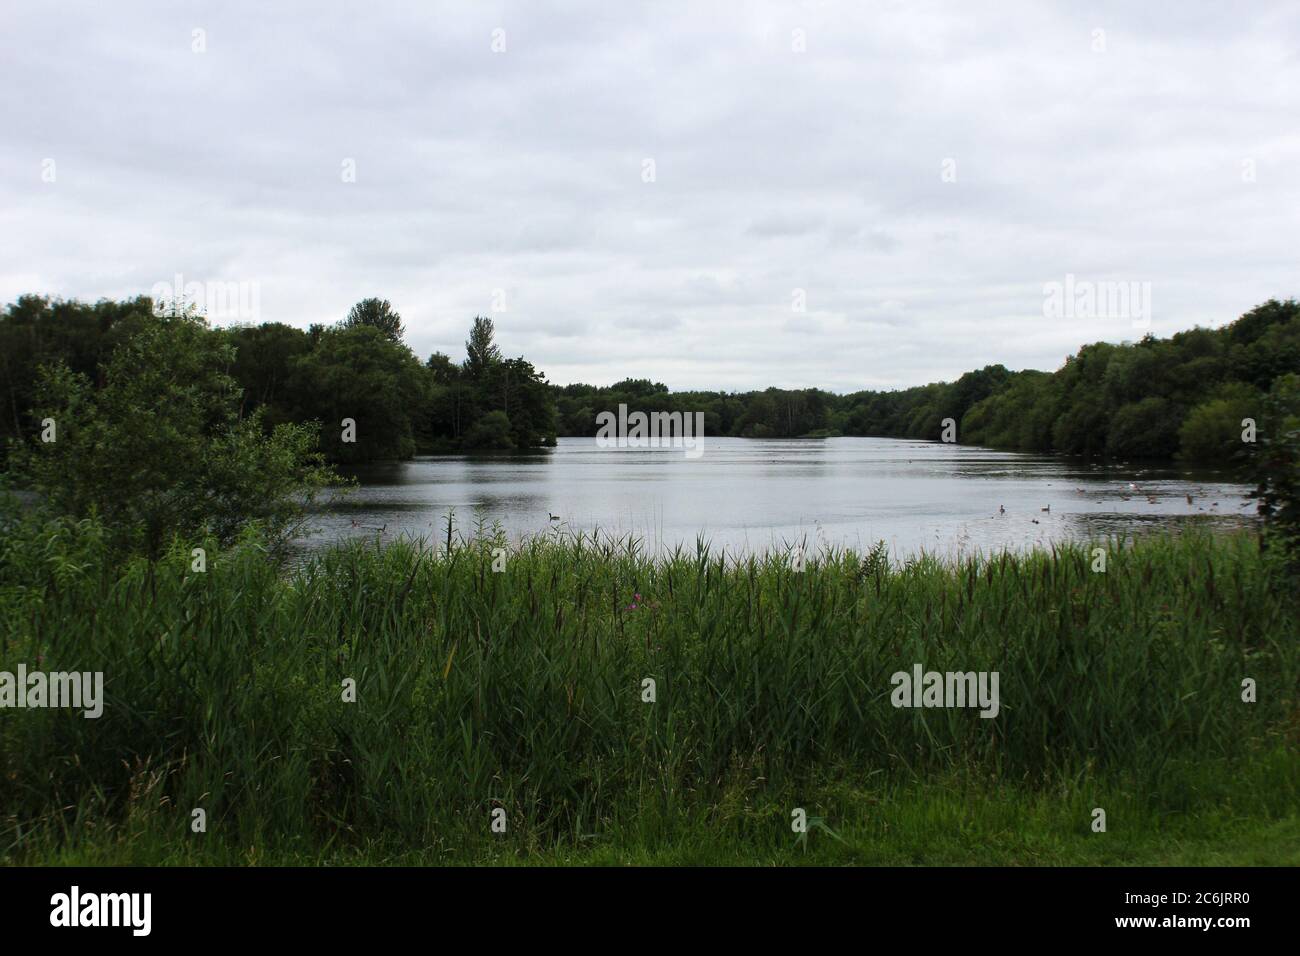 Scenery of Chorlton water park, including a lake and thick trees, in Manchester, England Stock Photo